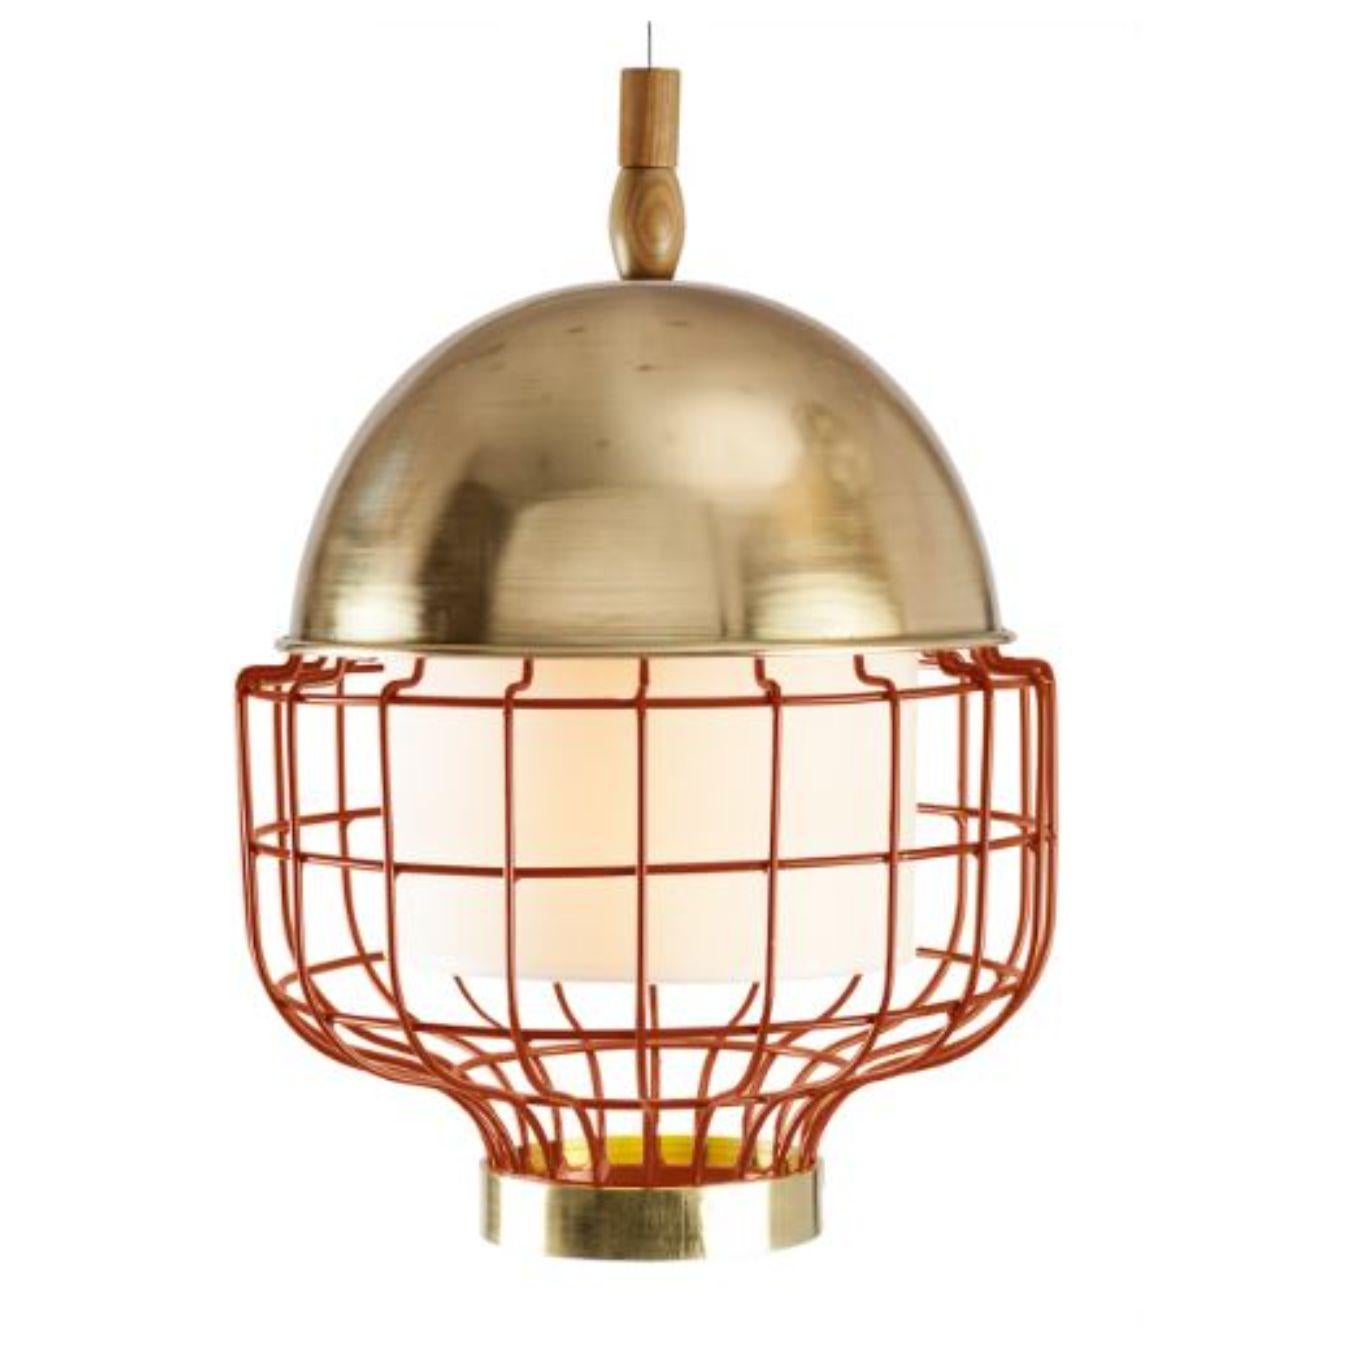 Portuguese Cobalt Magnolia III Suspension Lamp with Brass Ring by Dooq For Sale